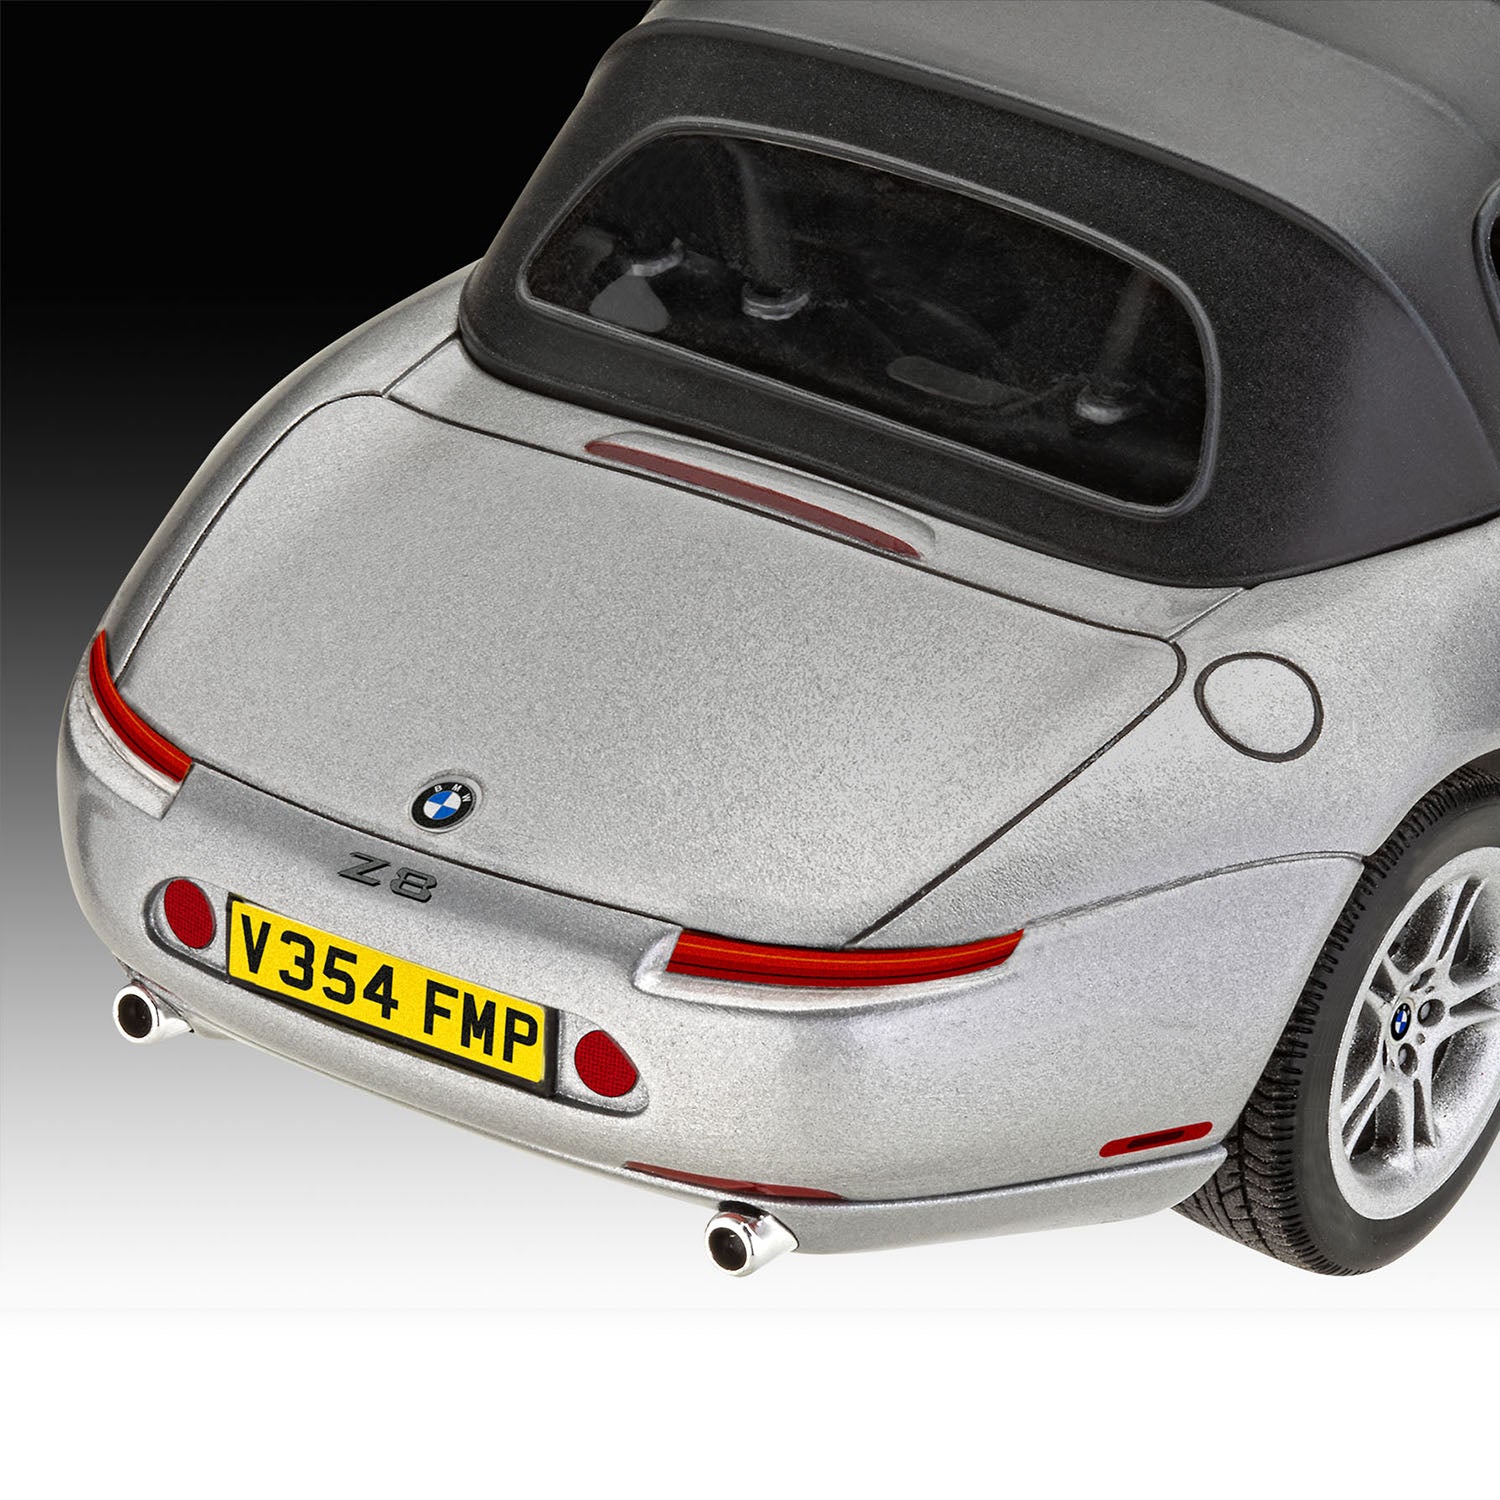 Revell 07080 Maquette BMW Z8 - francis miniatures